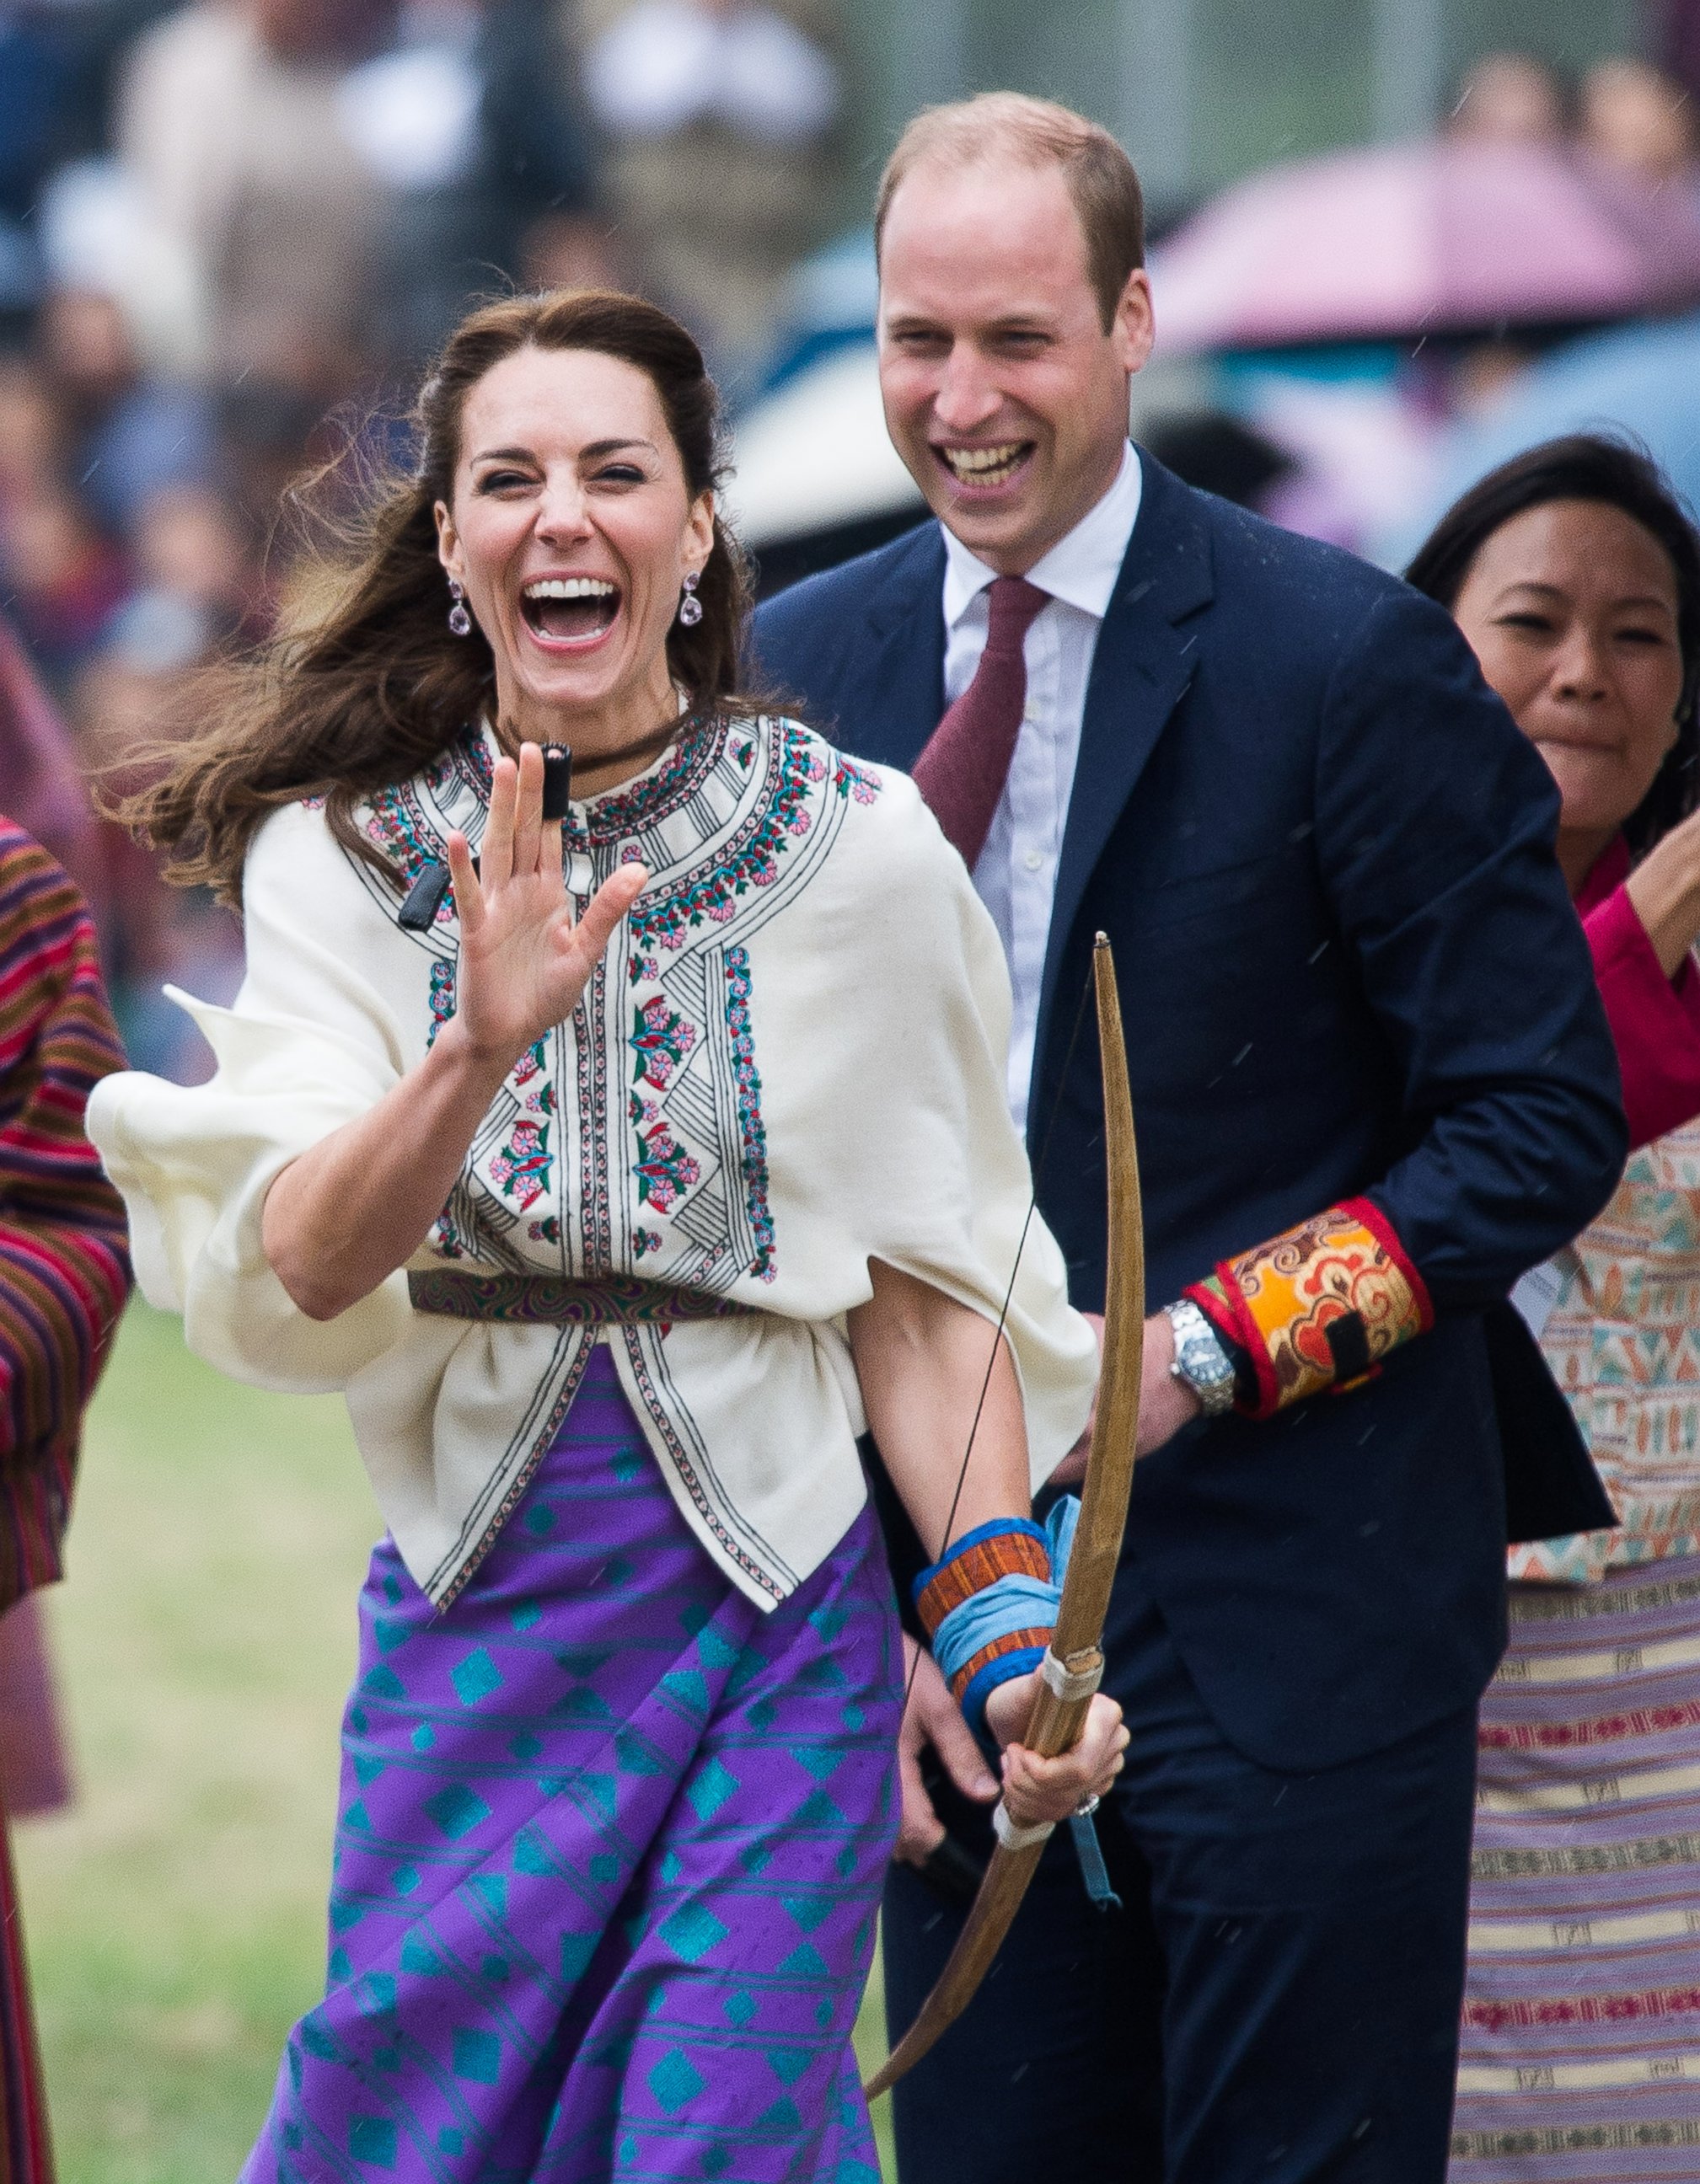 PHOTO: Catherine, Duchess of Cambridge and Prince William react as they take part in archery at Thimphu's open-air archery venue, April 14, 2016, in Thimphu, Bhutan.